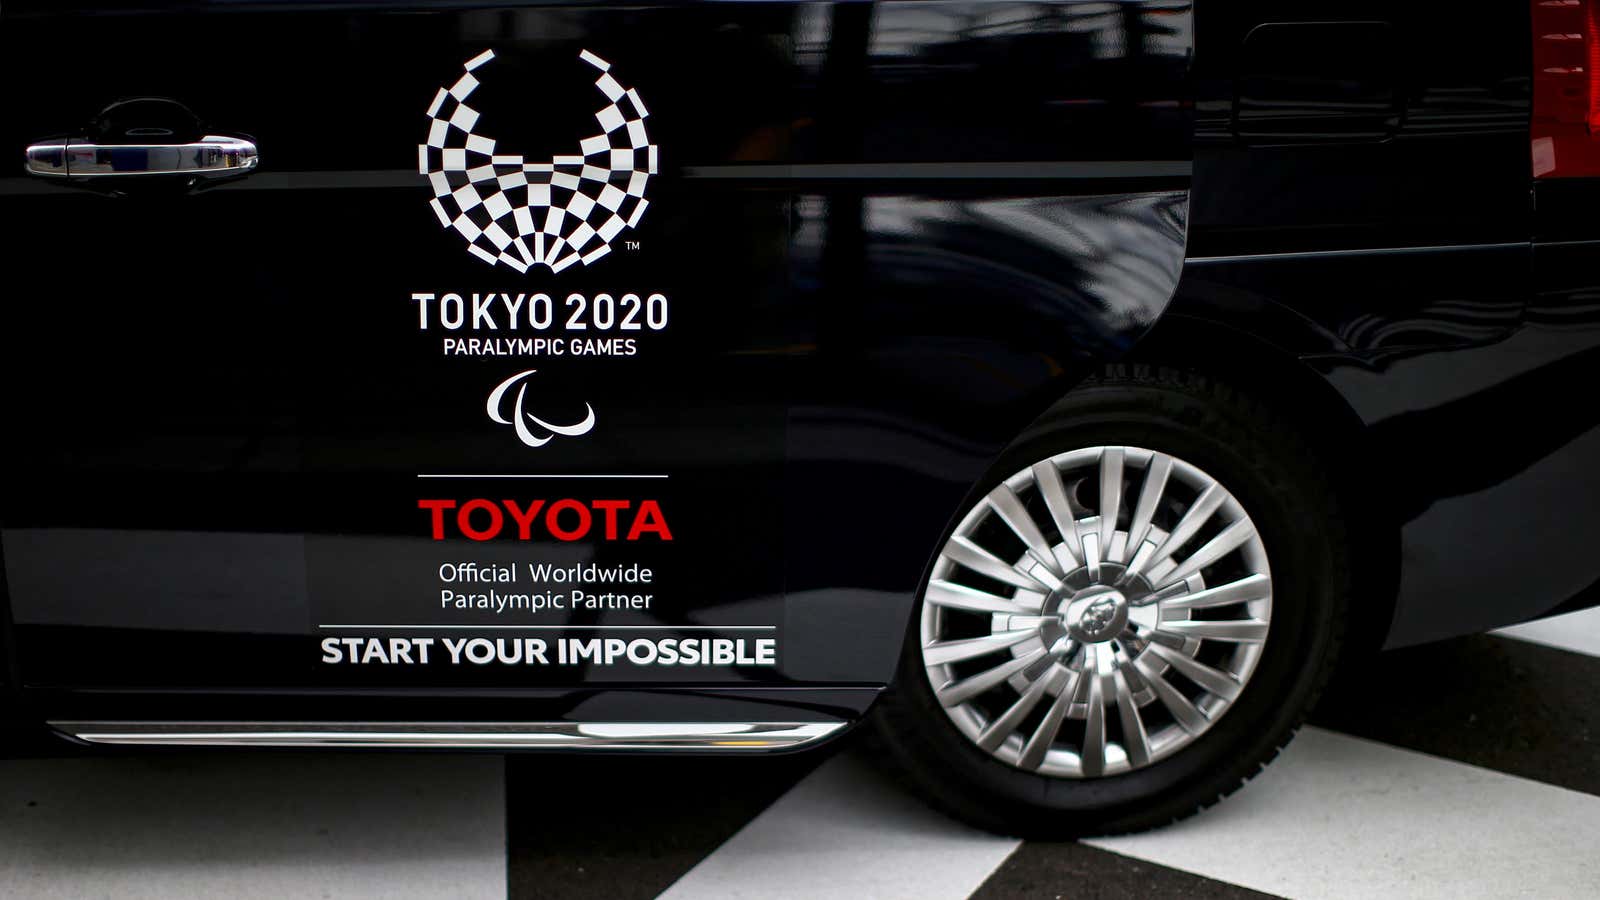 A Toyota logo, Worldwide Sponsor for Tokyo 2020 Olympic Games, is pictured on a taxi in Tokyo